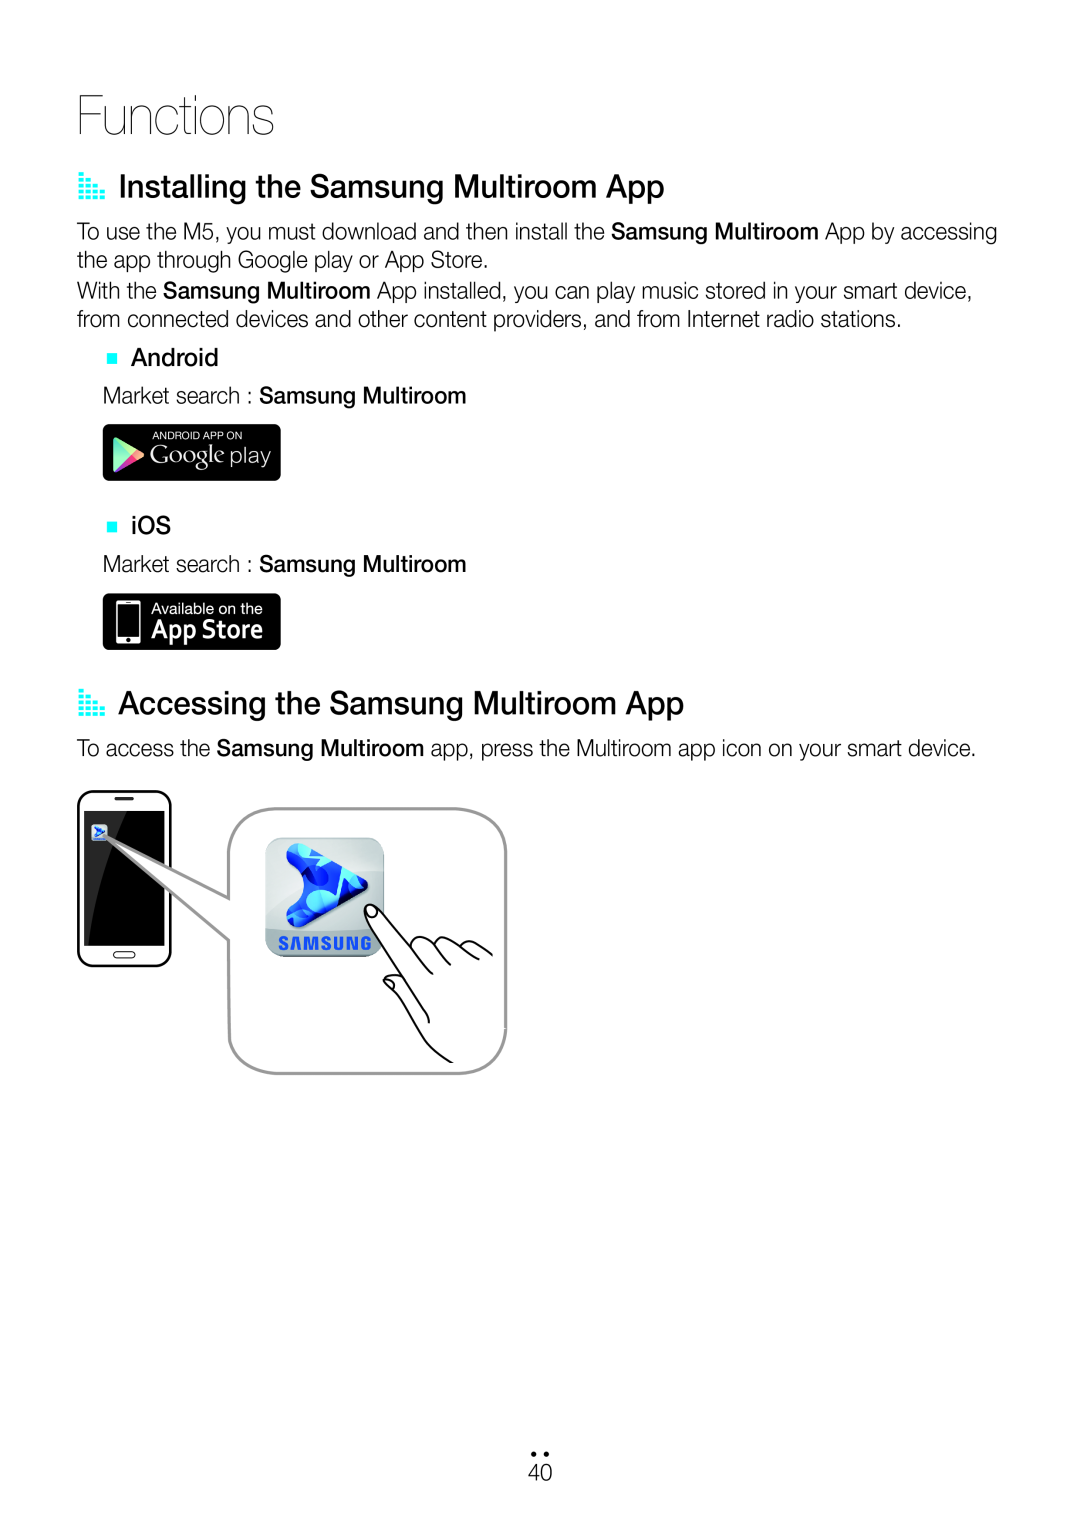 Samsung M5 Functions, AA Installing the Samsung Multiroom App, AA Accessing the Samsung Multiroom App, `` Android, `` iOS 